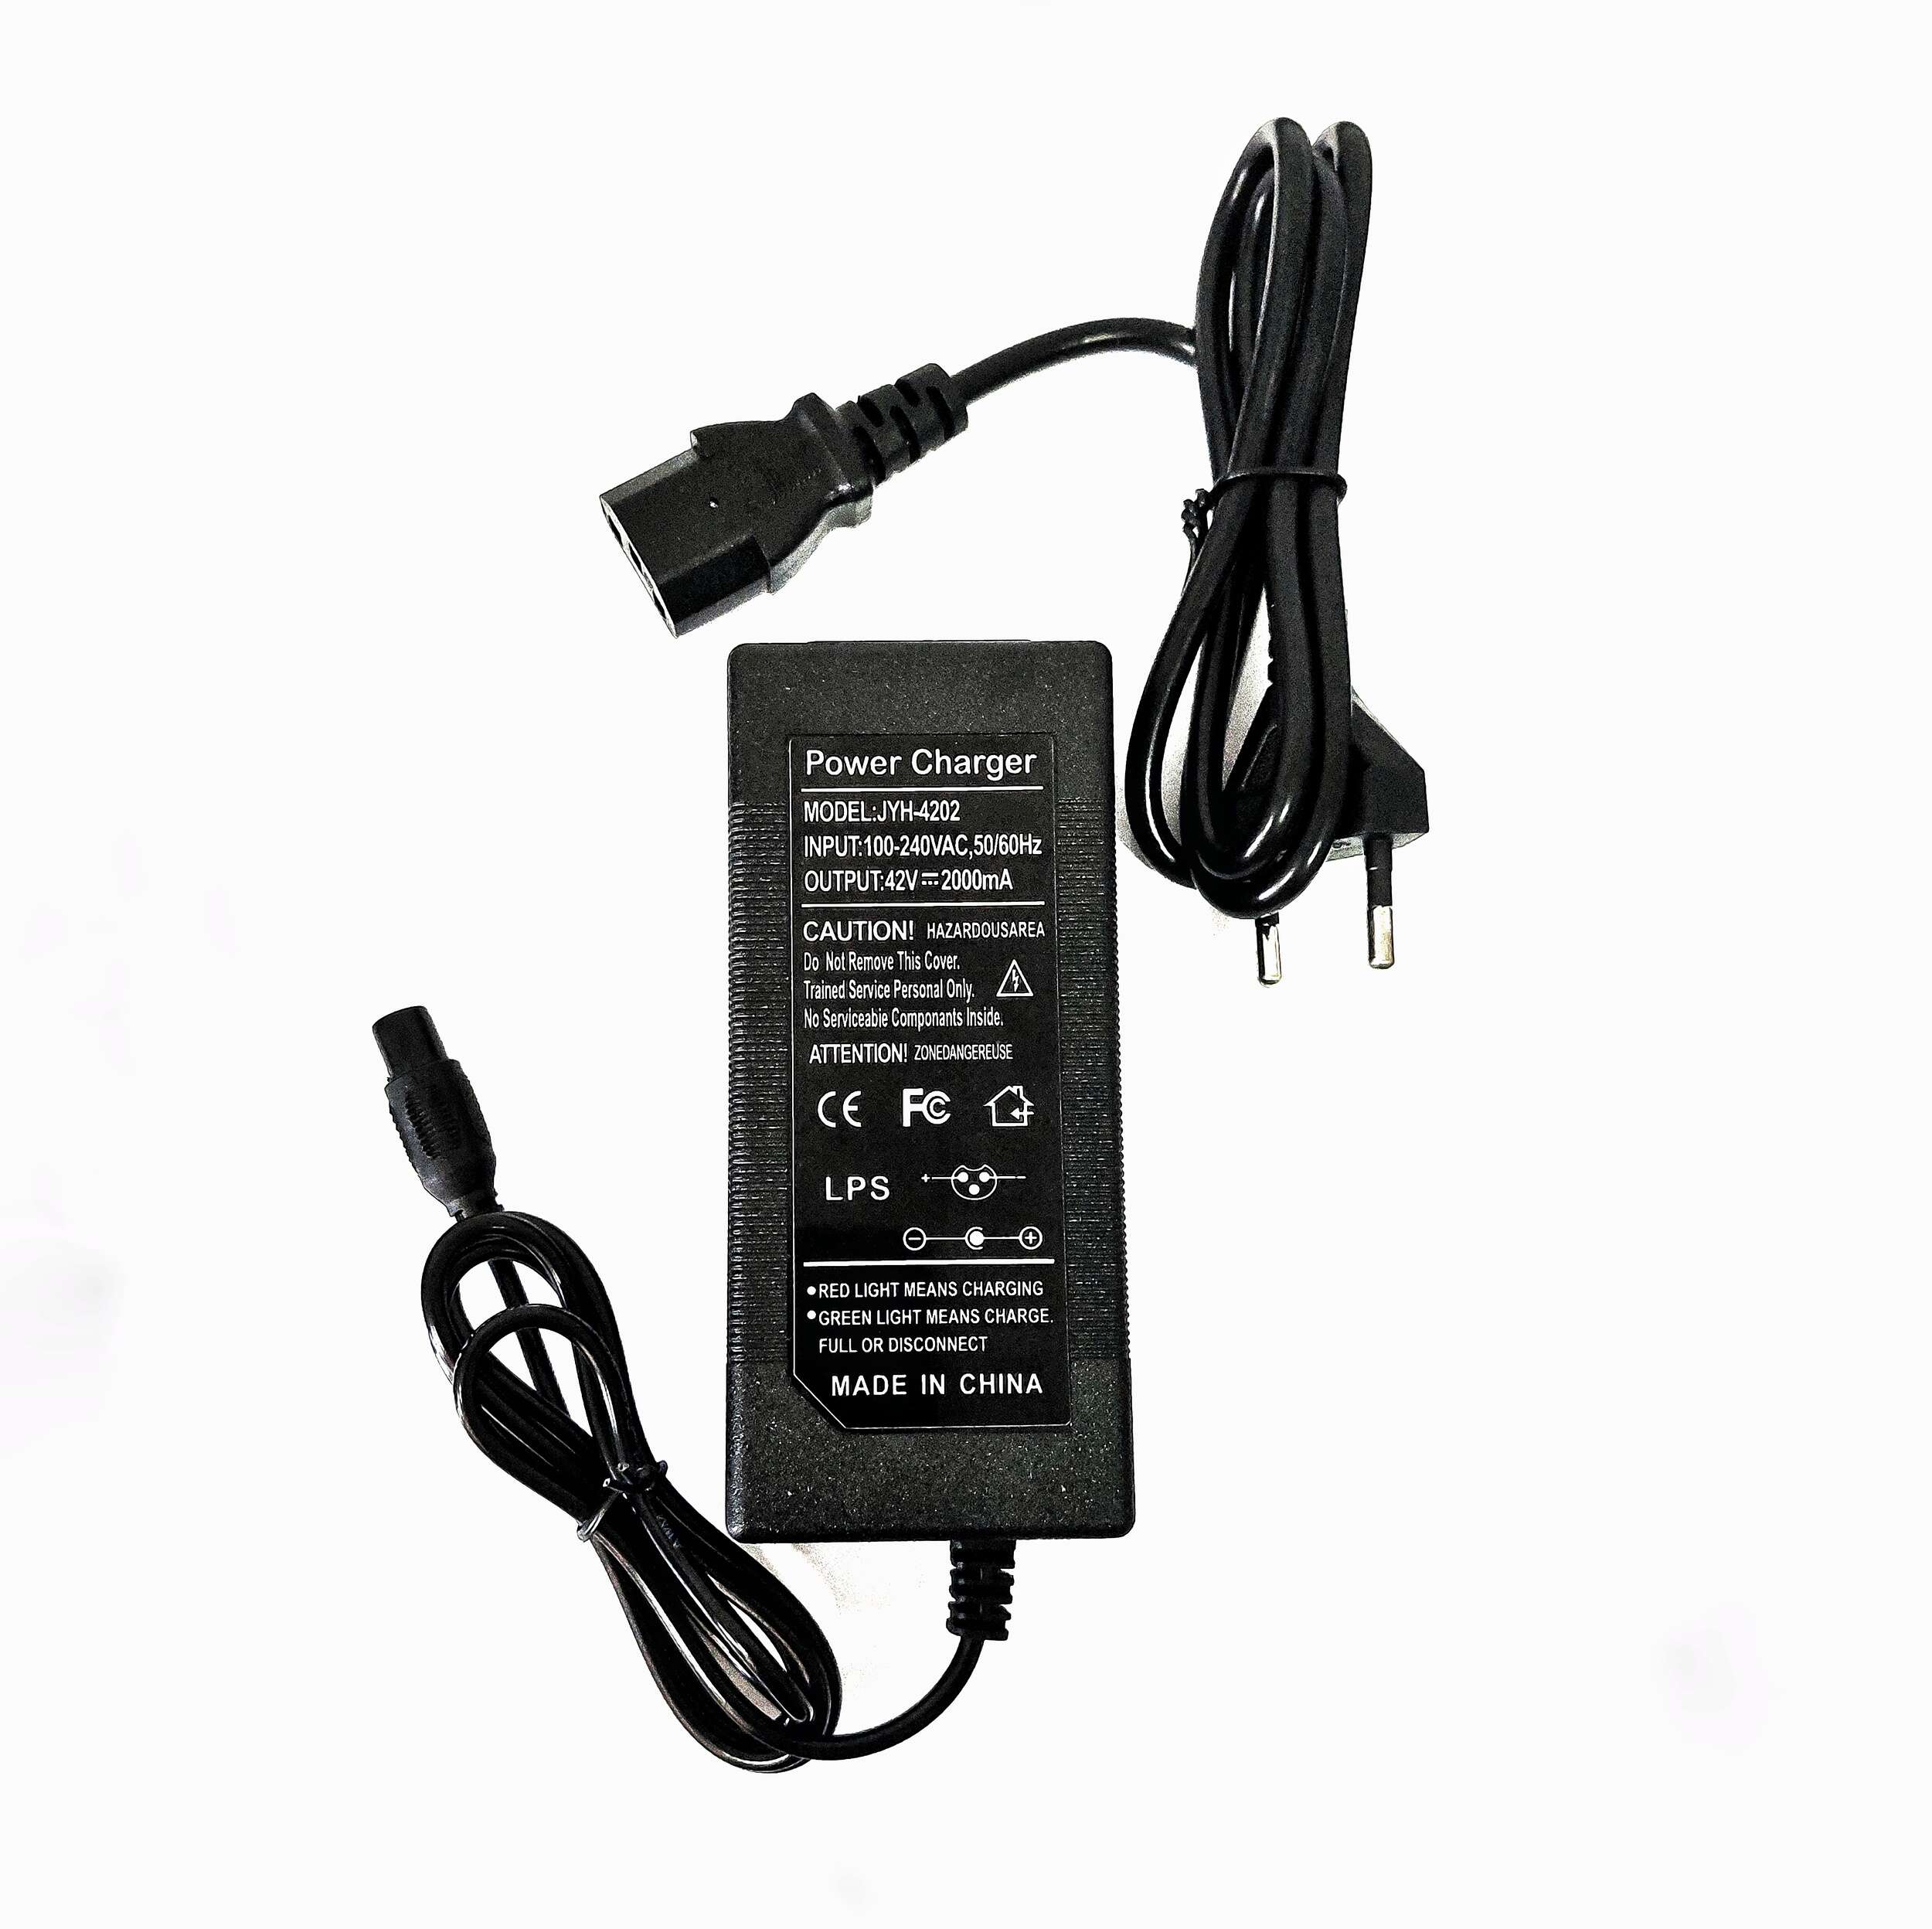 Quality battery charger output 42v 2a At Great Prices 